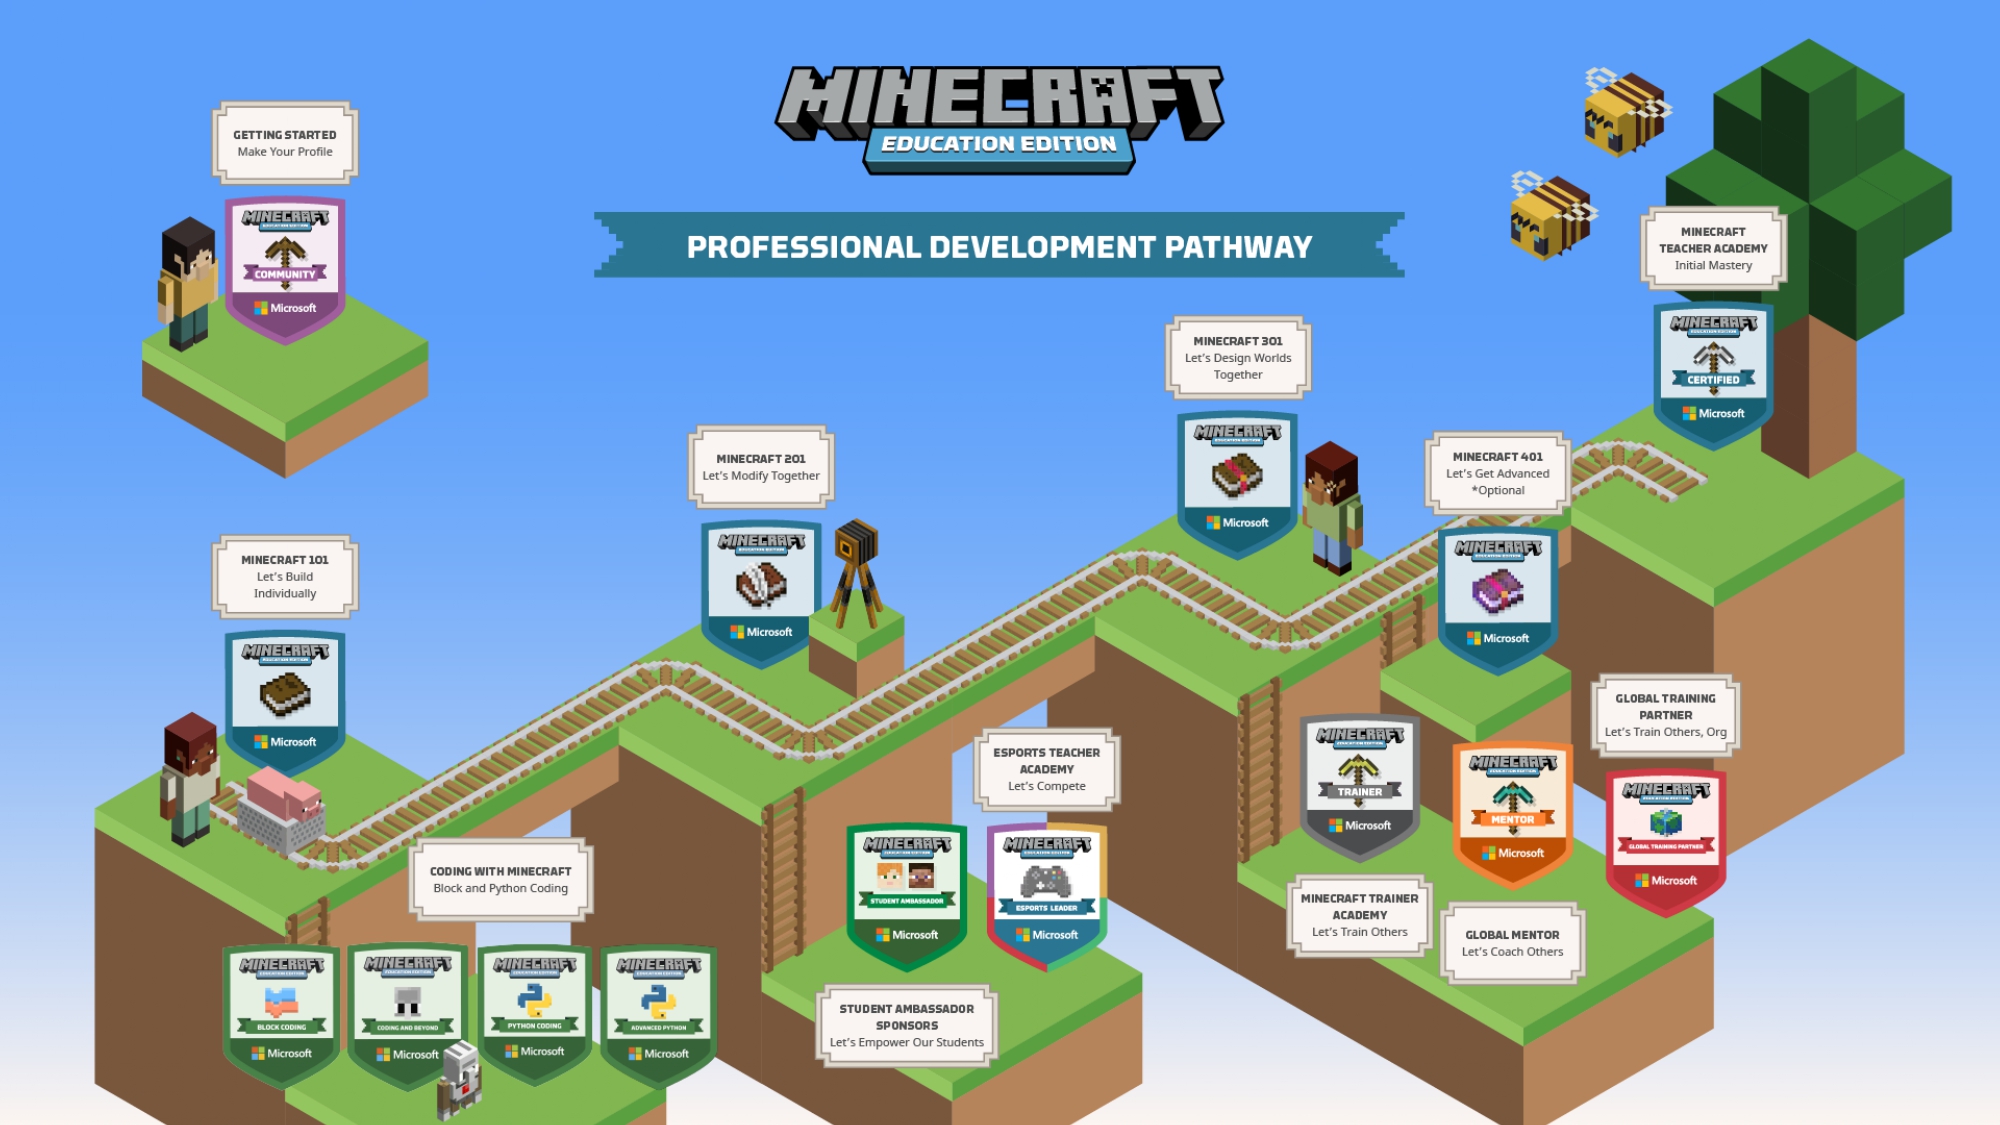 Minecraft Education Learning path